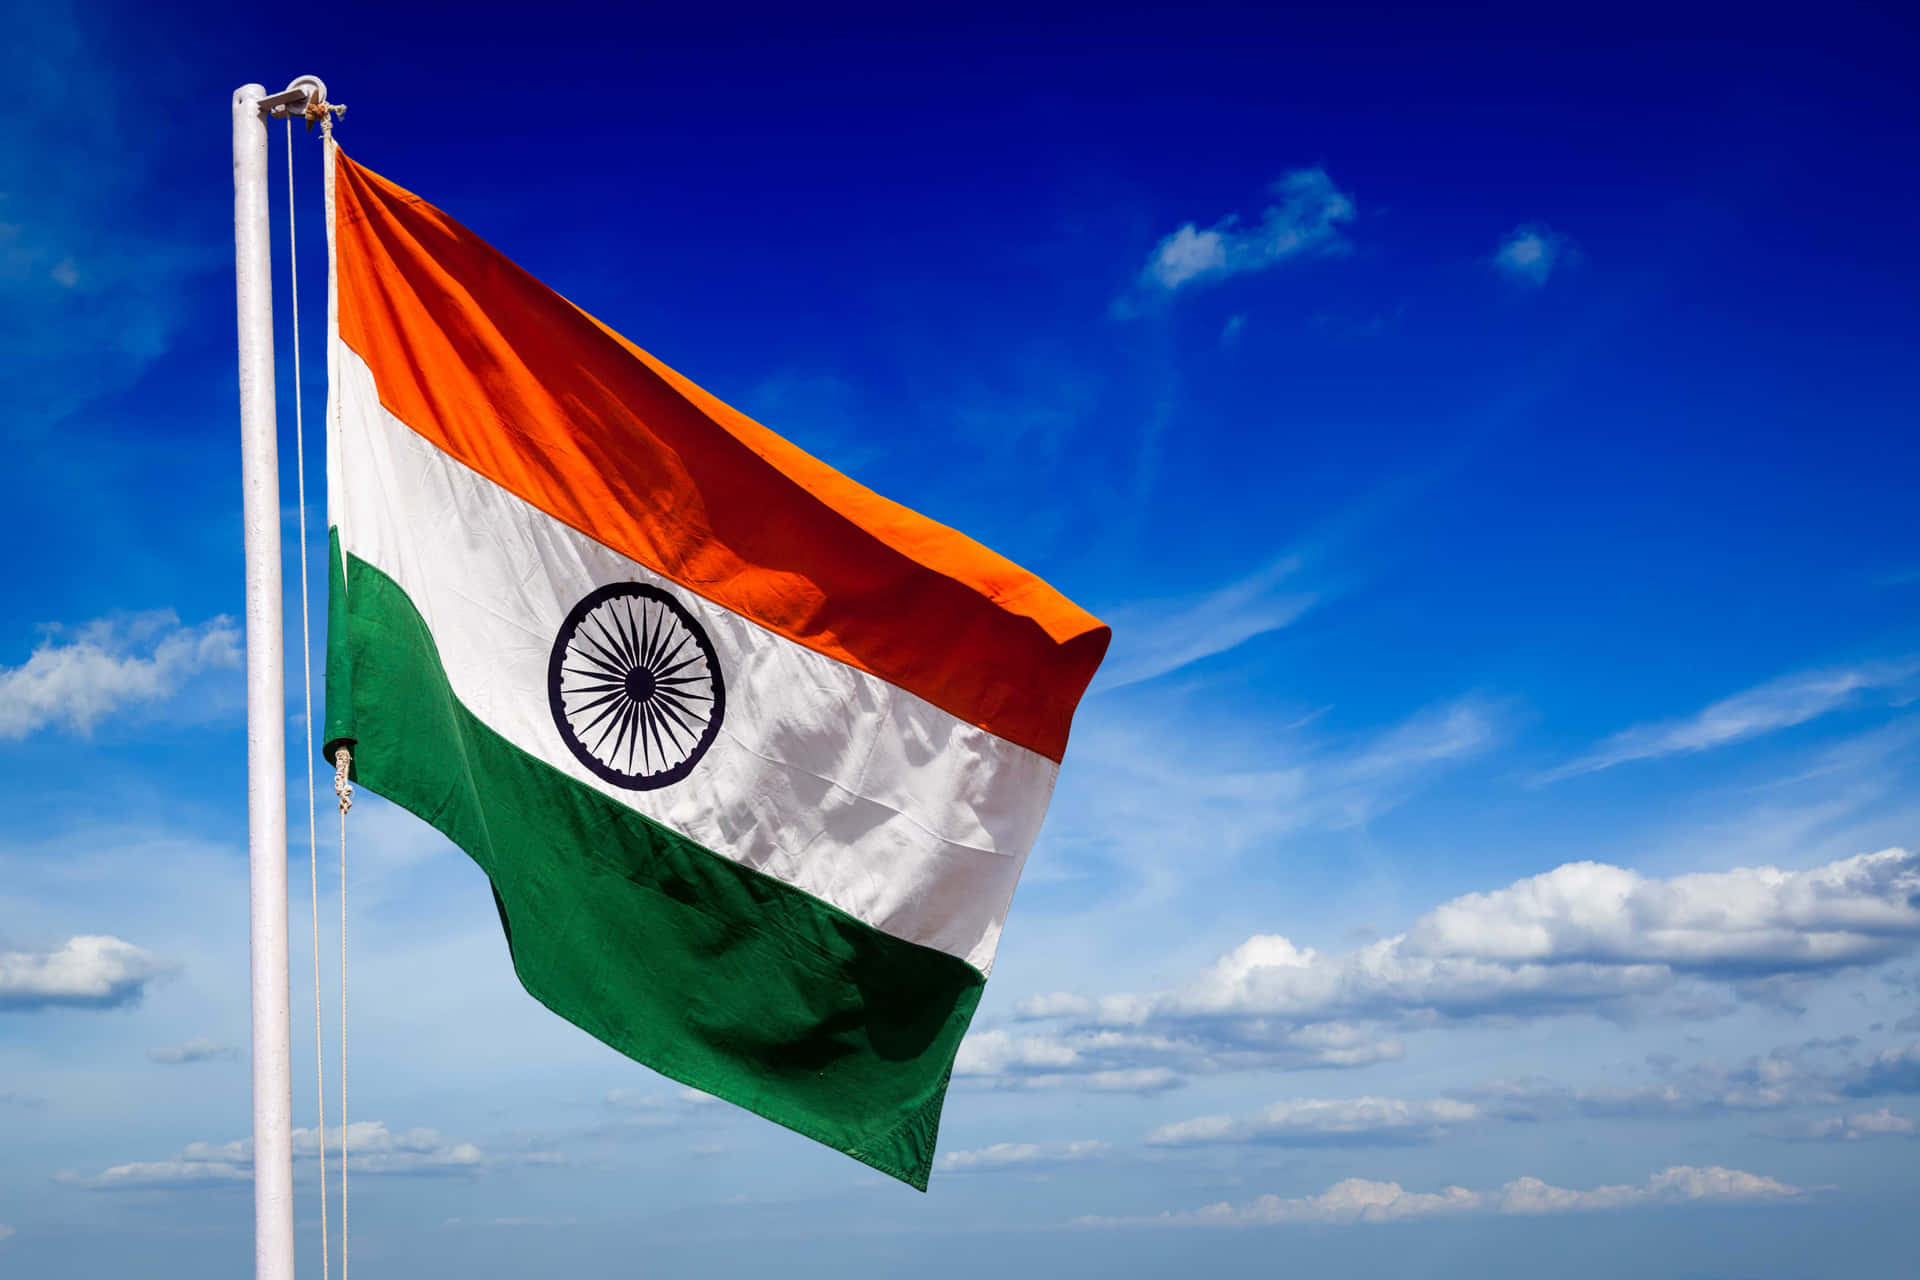 Show your pride in India's tricolor flag